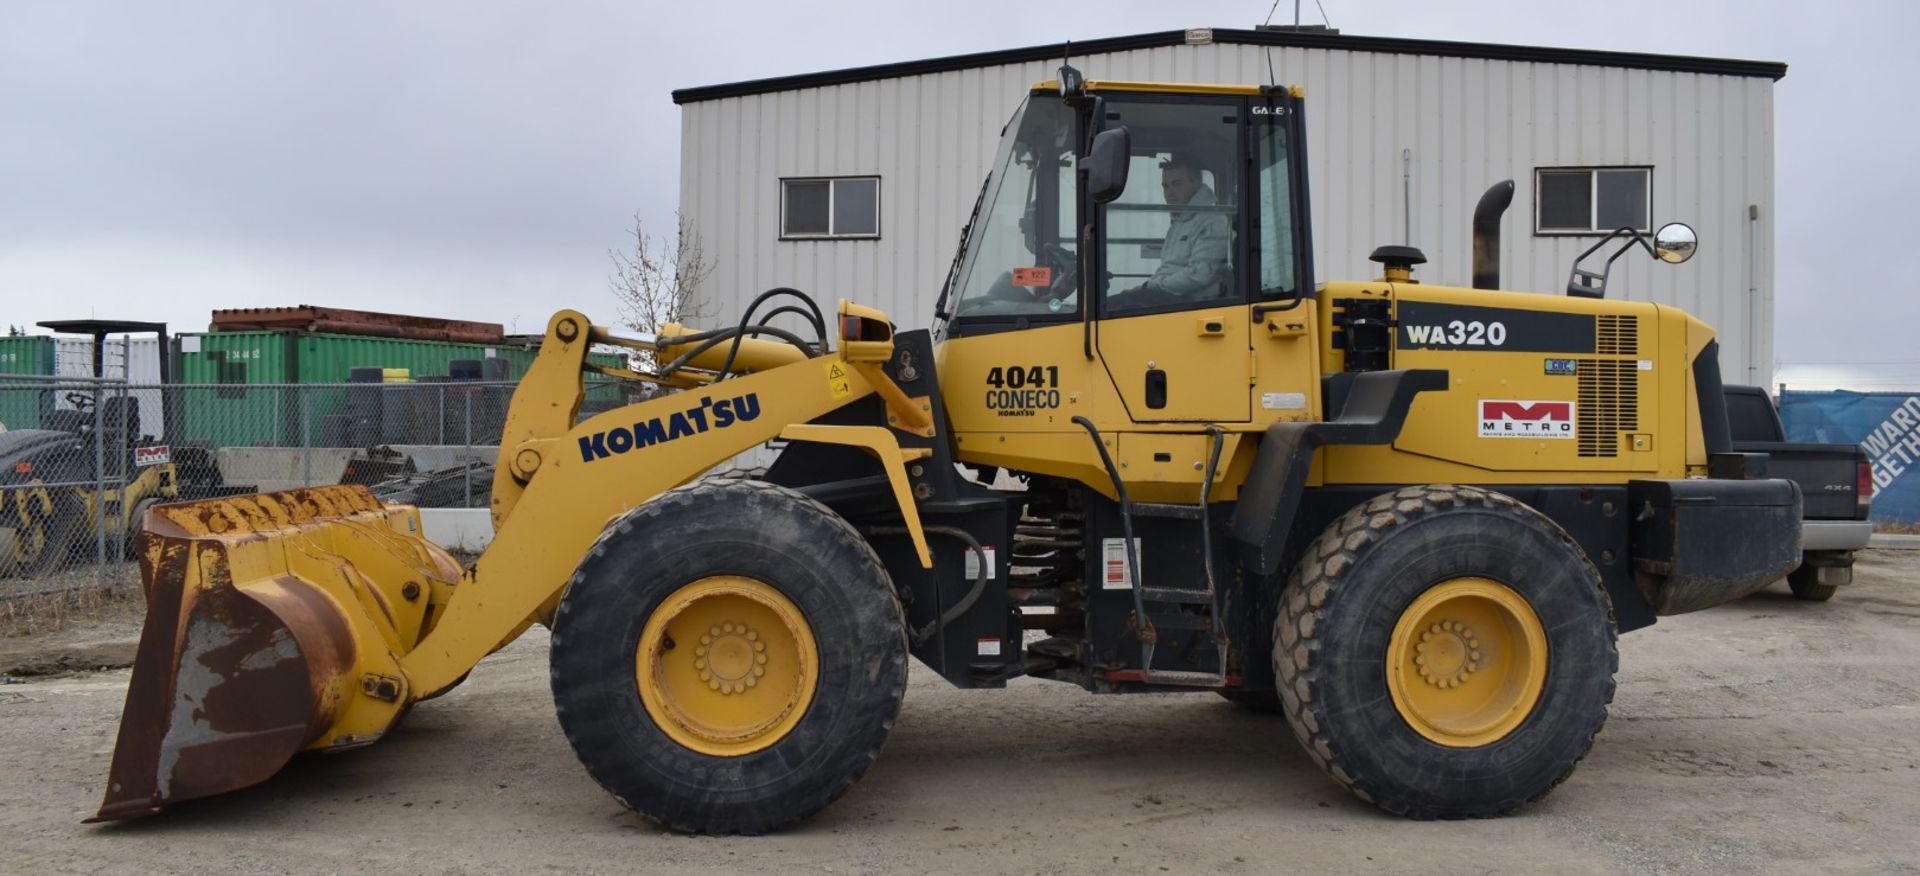 KOMATSU (2008) WA320-6 ARTICULATING FRONT-END WHEEL LOADER WITH BUCKET, APPROX. 7,885 HOURS ( - Image 3 of 20